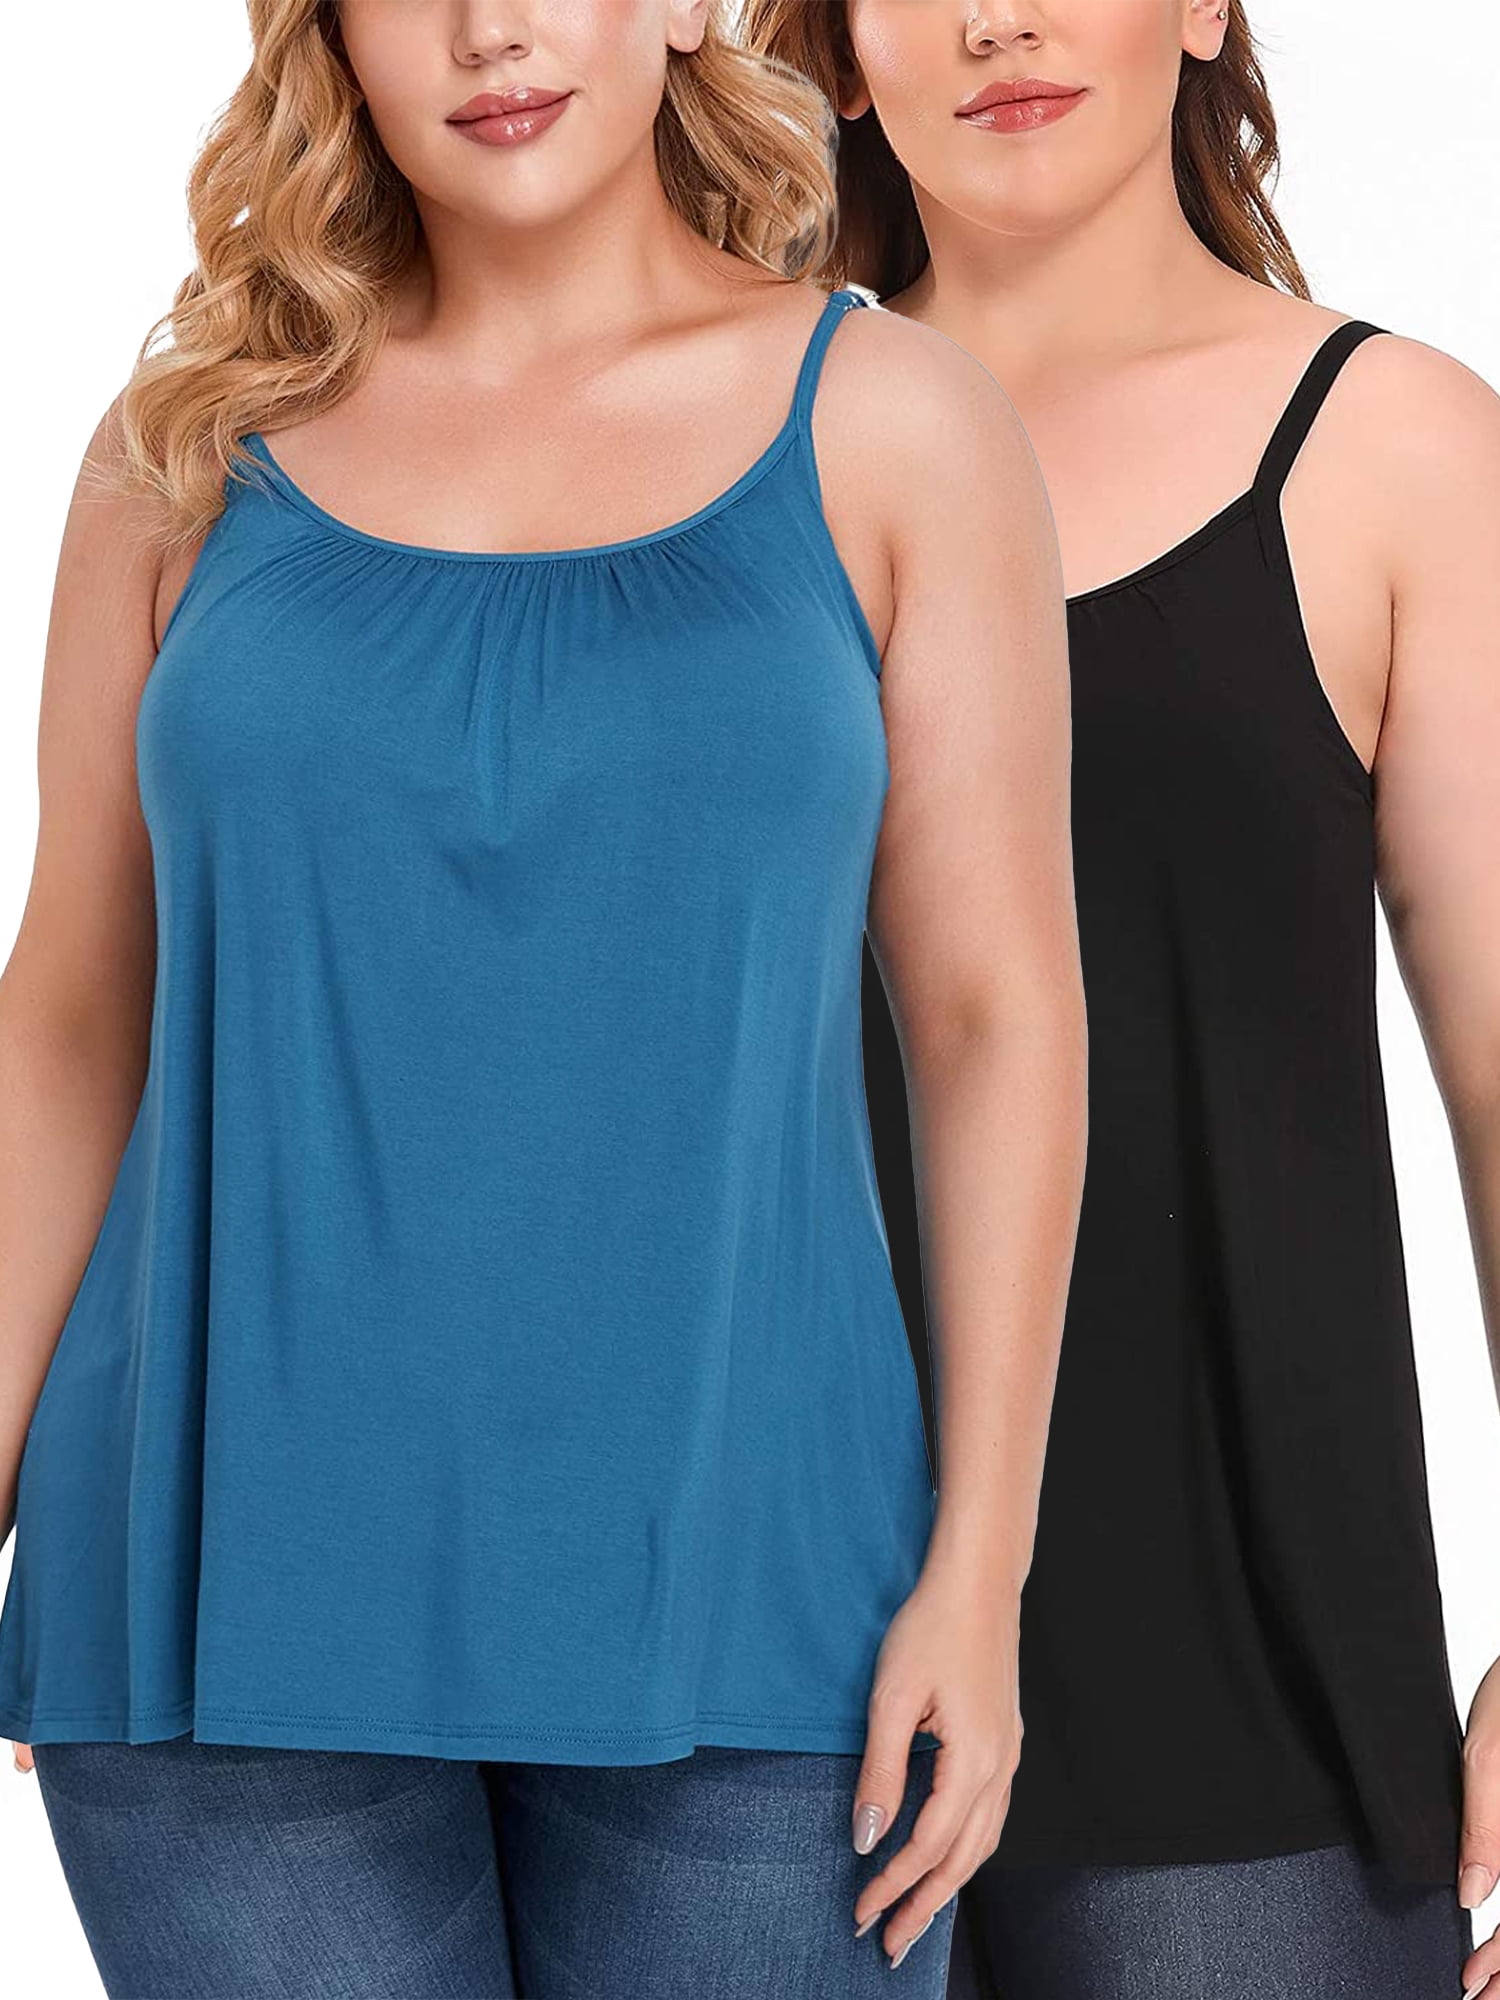 FITVALEN Women's Camisole with Built in Bra Plus Size Casual Loose Tank ...